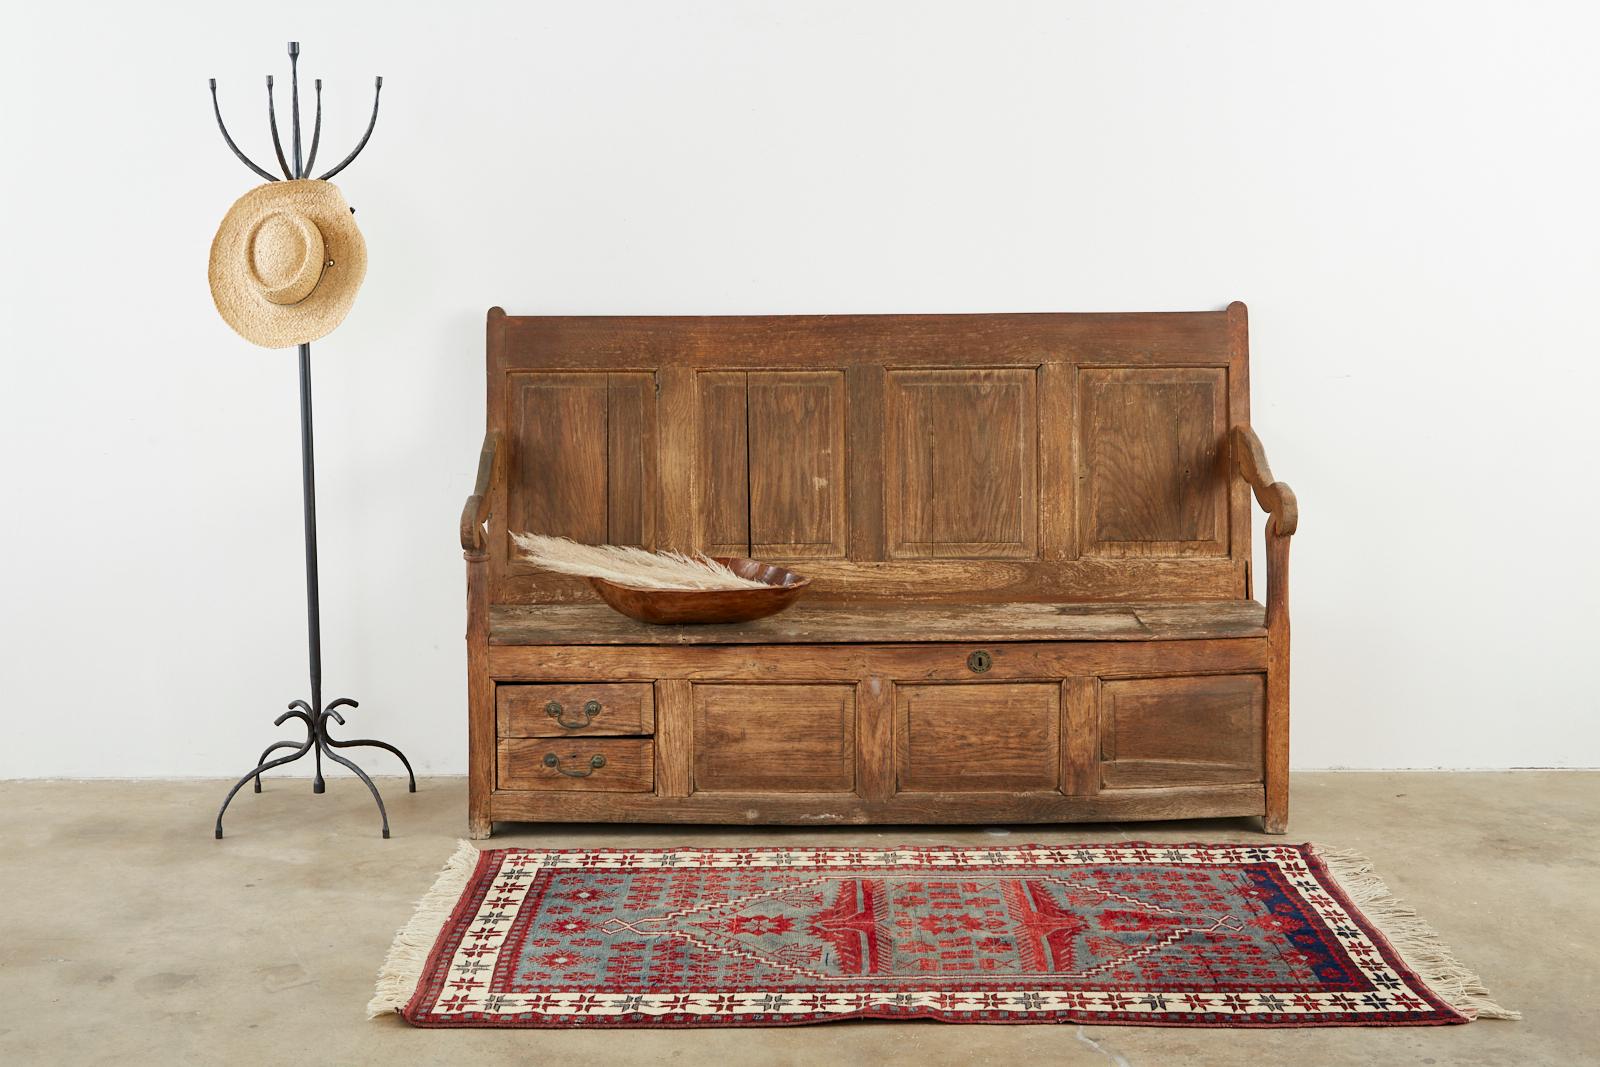 Rustic 19th century English Georgian box settle or hall bench. Crafted from oak featuring a paneled back. The large storage box has two small storage drawers on the front left with iron pulls. The seat has a hinged lid that opens to the large